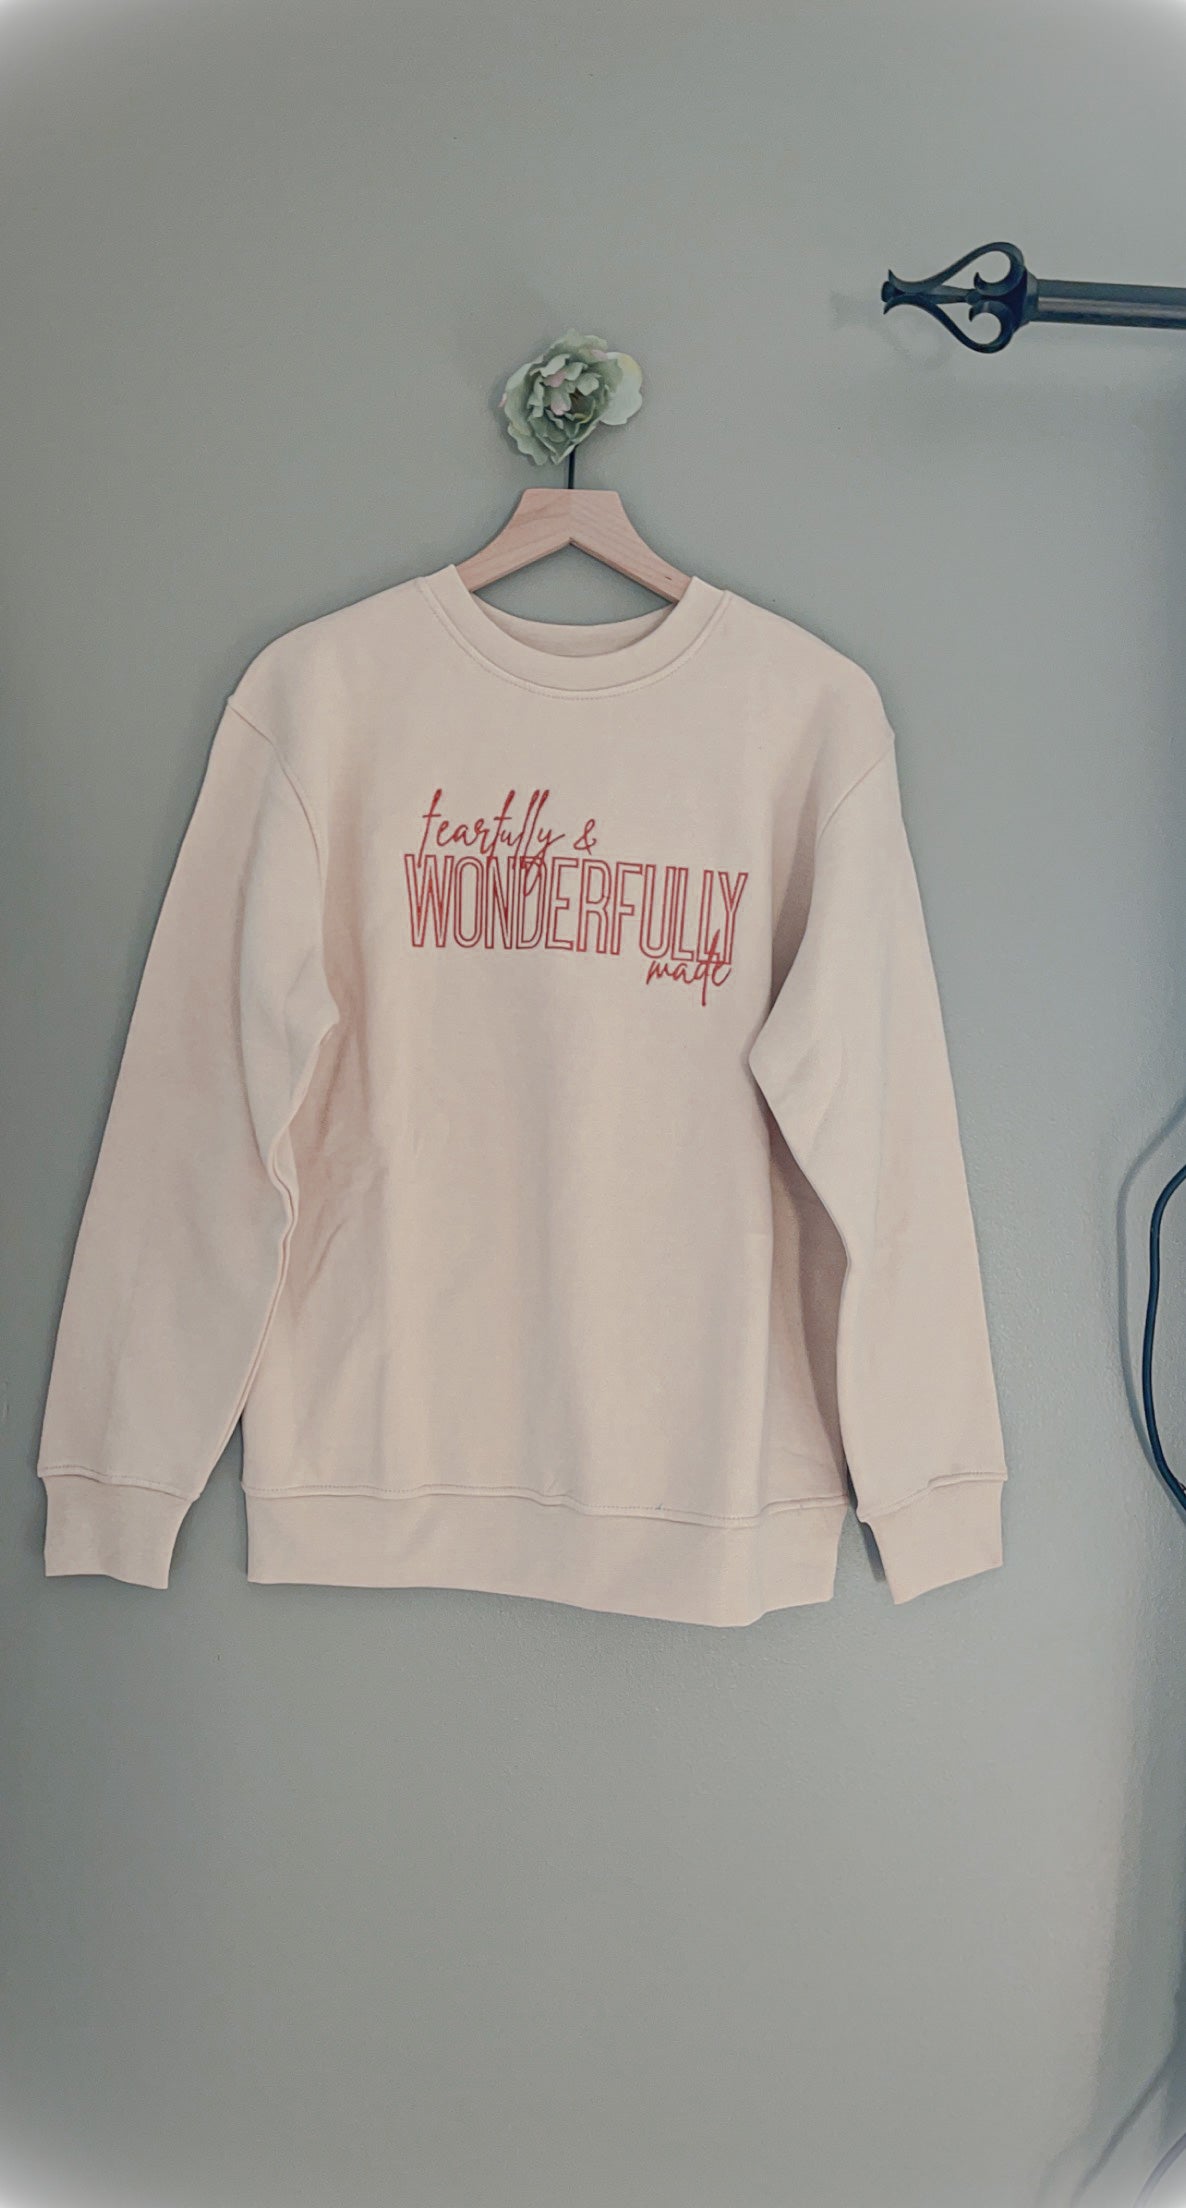 Fearfully & wonderfully made embroidery sweater